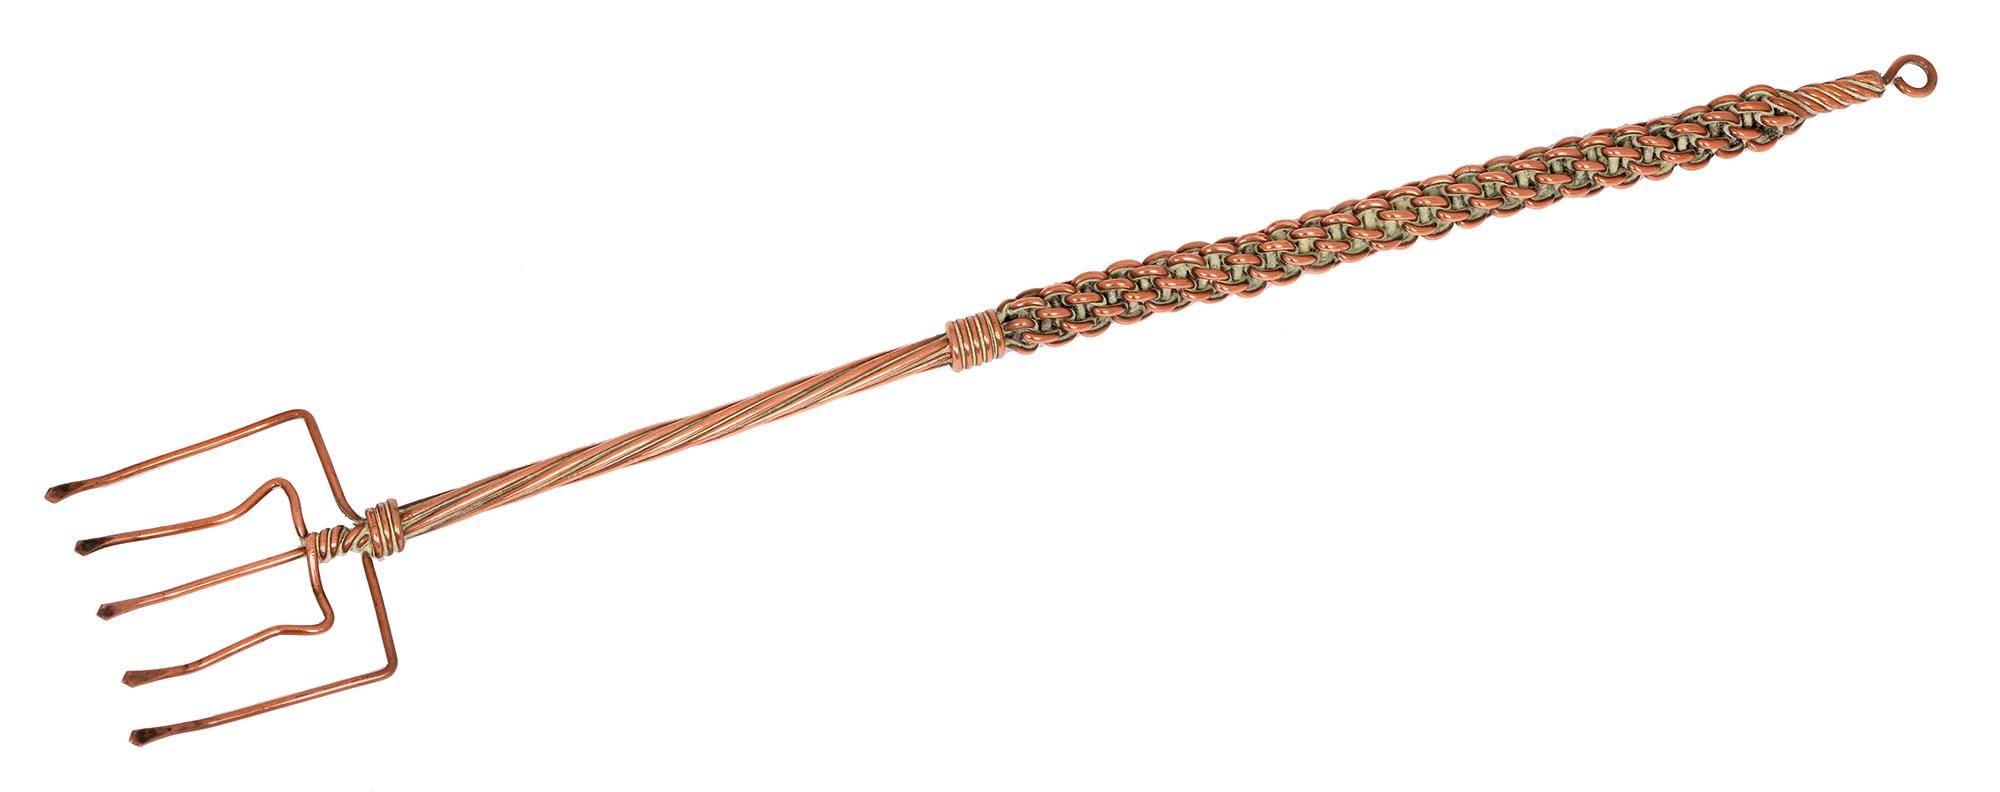 An unusual and improbable copper five prong toasting fork, 19th / early 20th c, 49.5cm l Complete